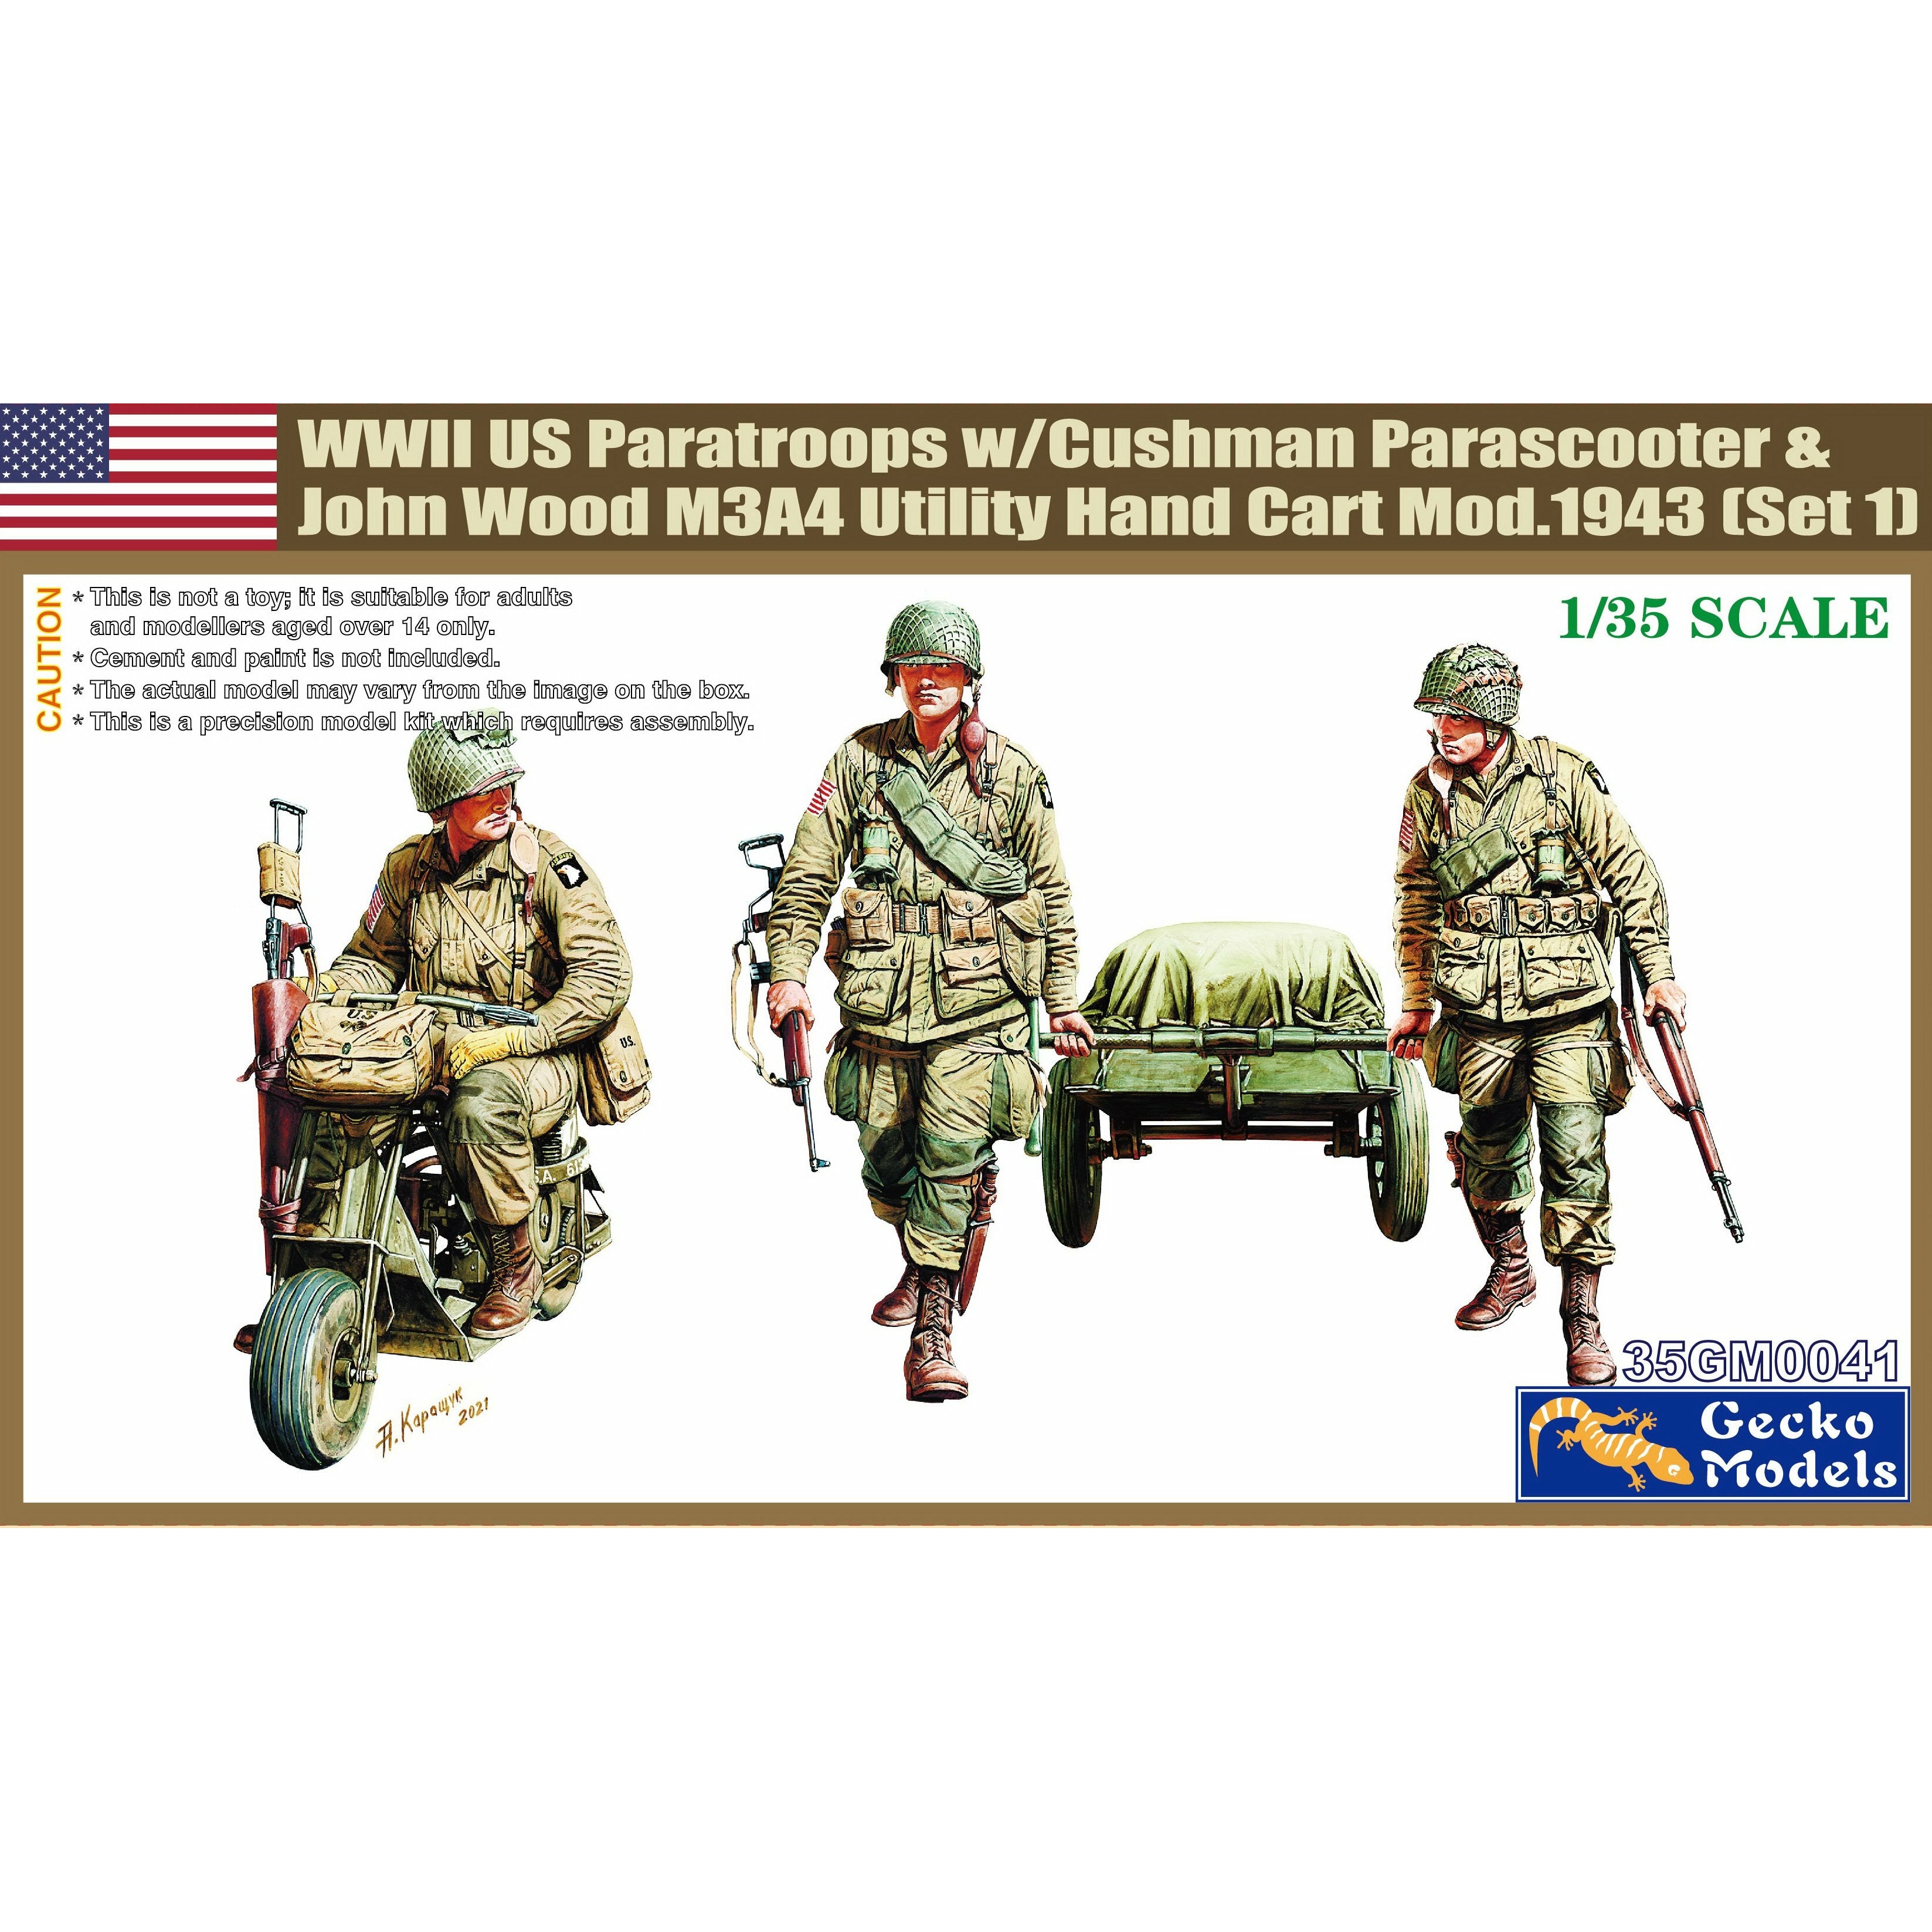 WWII US Paratroops w/Cushman Parascooter & John Wood M3A4 Utility Hand Cart MOd. 1943 (Set 1) 1/35 #0041 by Gecko Models